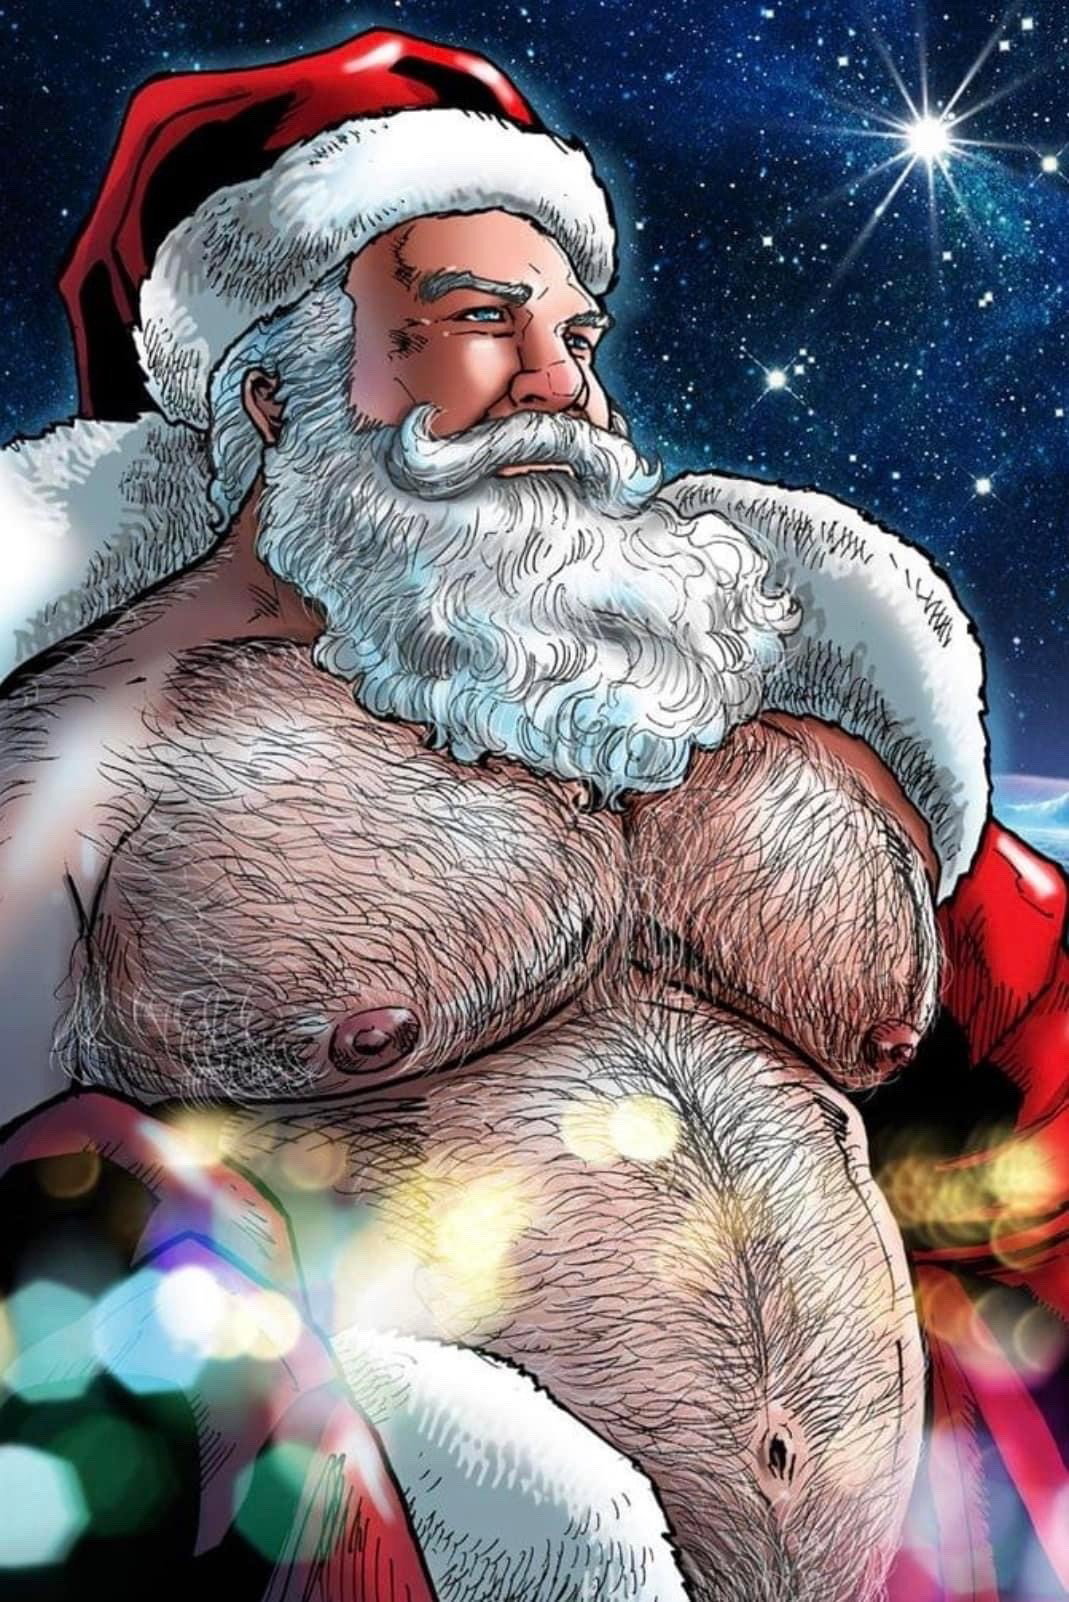 Photo by DirtyDaddyFunStuff with the username @DirtyDaddyPorn, who is a verified user,  January 7, 2024 at 9:55 PM and the text says 'A Sexy Christmas!  #santa #beards #bears #muscles #hairy'